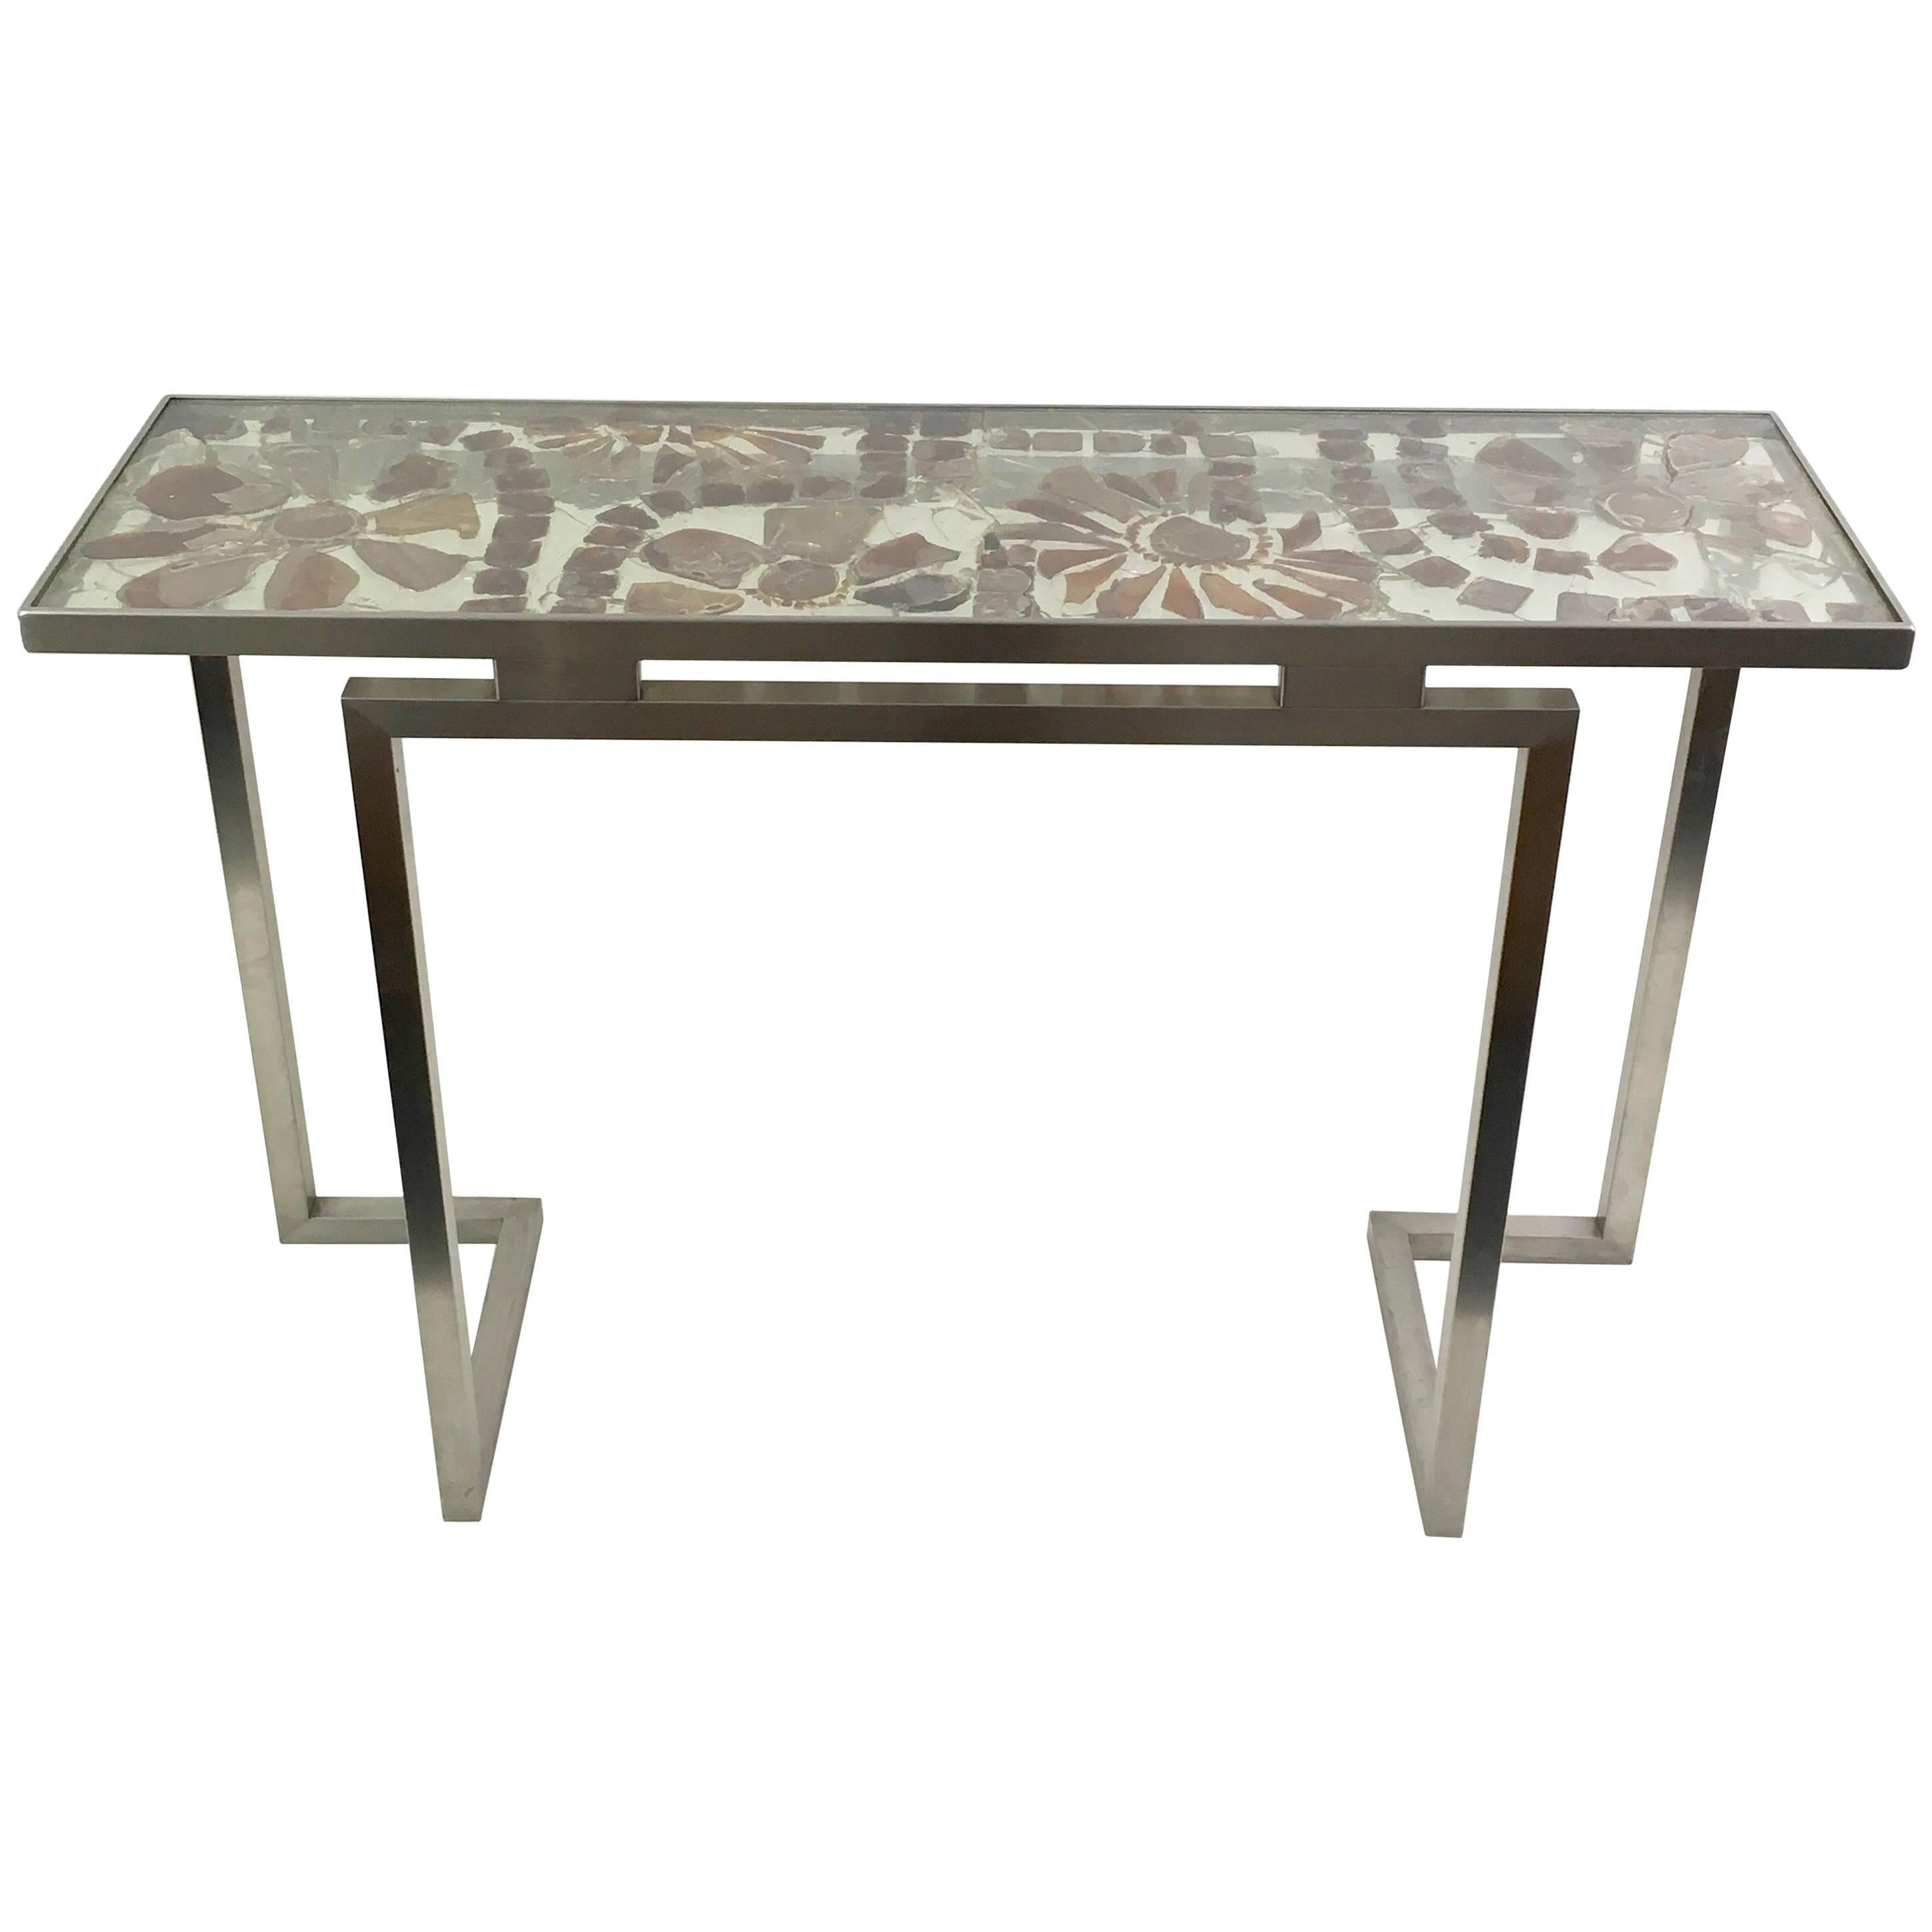 Marie Claude de Fouquieres Resin and Stainless Steel Console For Sale